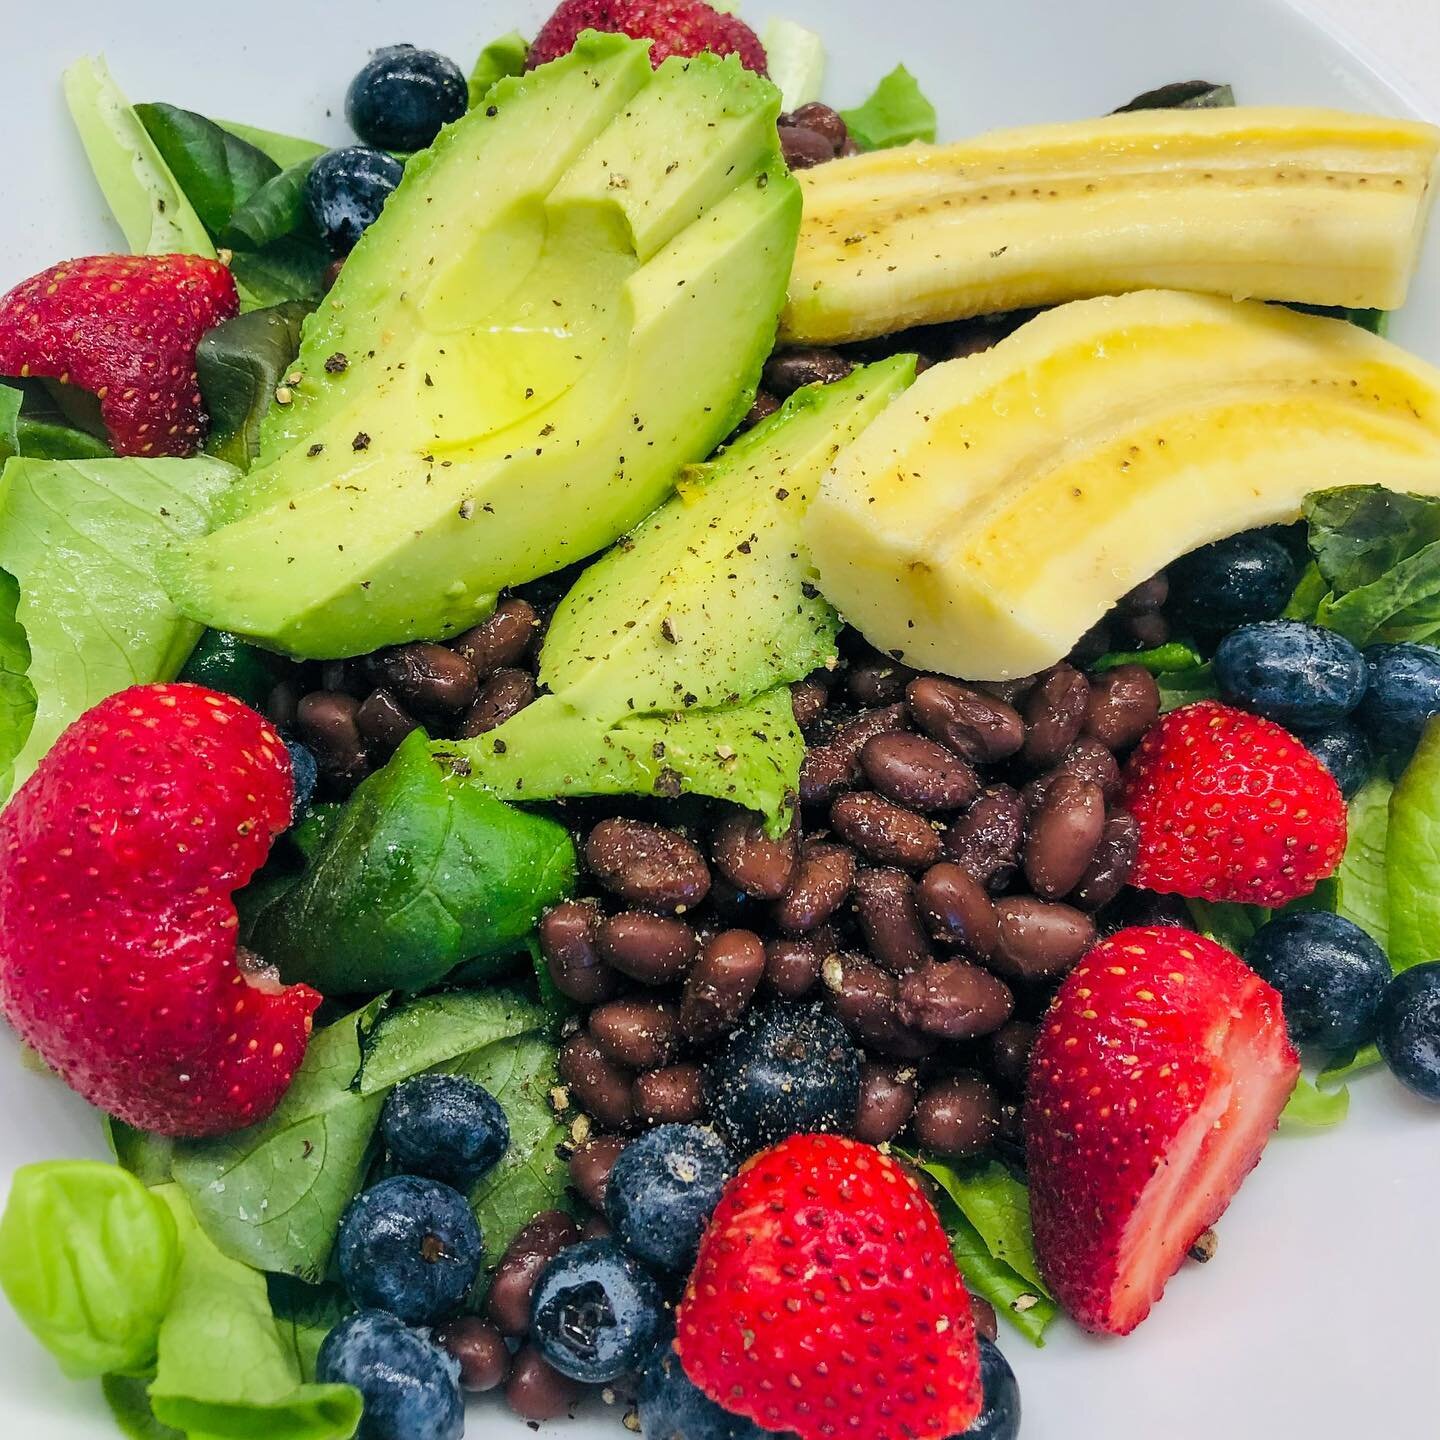 Starting each week practicing Meatless Monday can lead you, your family and your community to eat more fruits, vegetables, beans and plant-based meals throughout the rest of the week.

It&rsquo;s a delicious, nutritious path to the good health you de